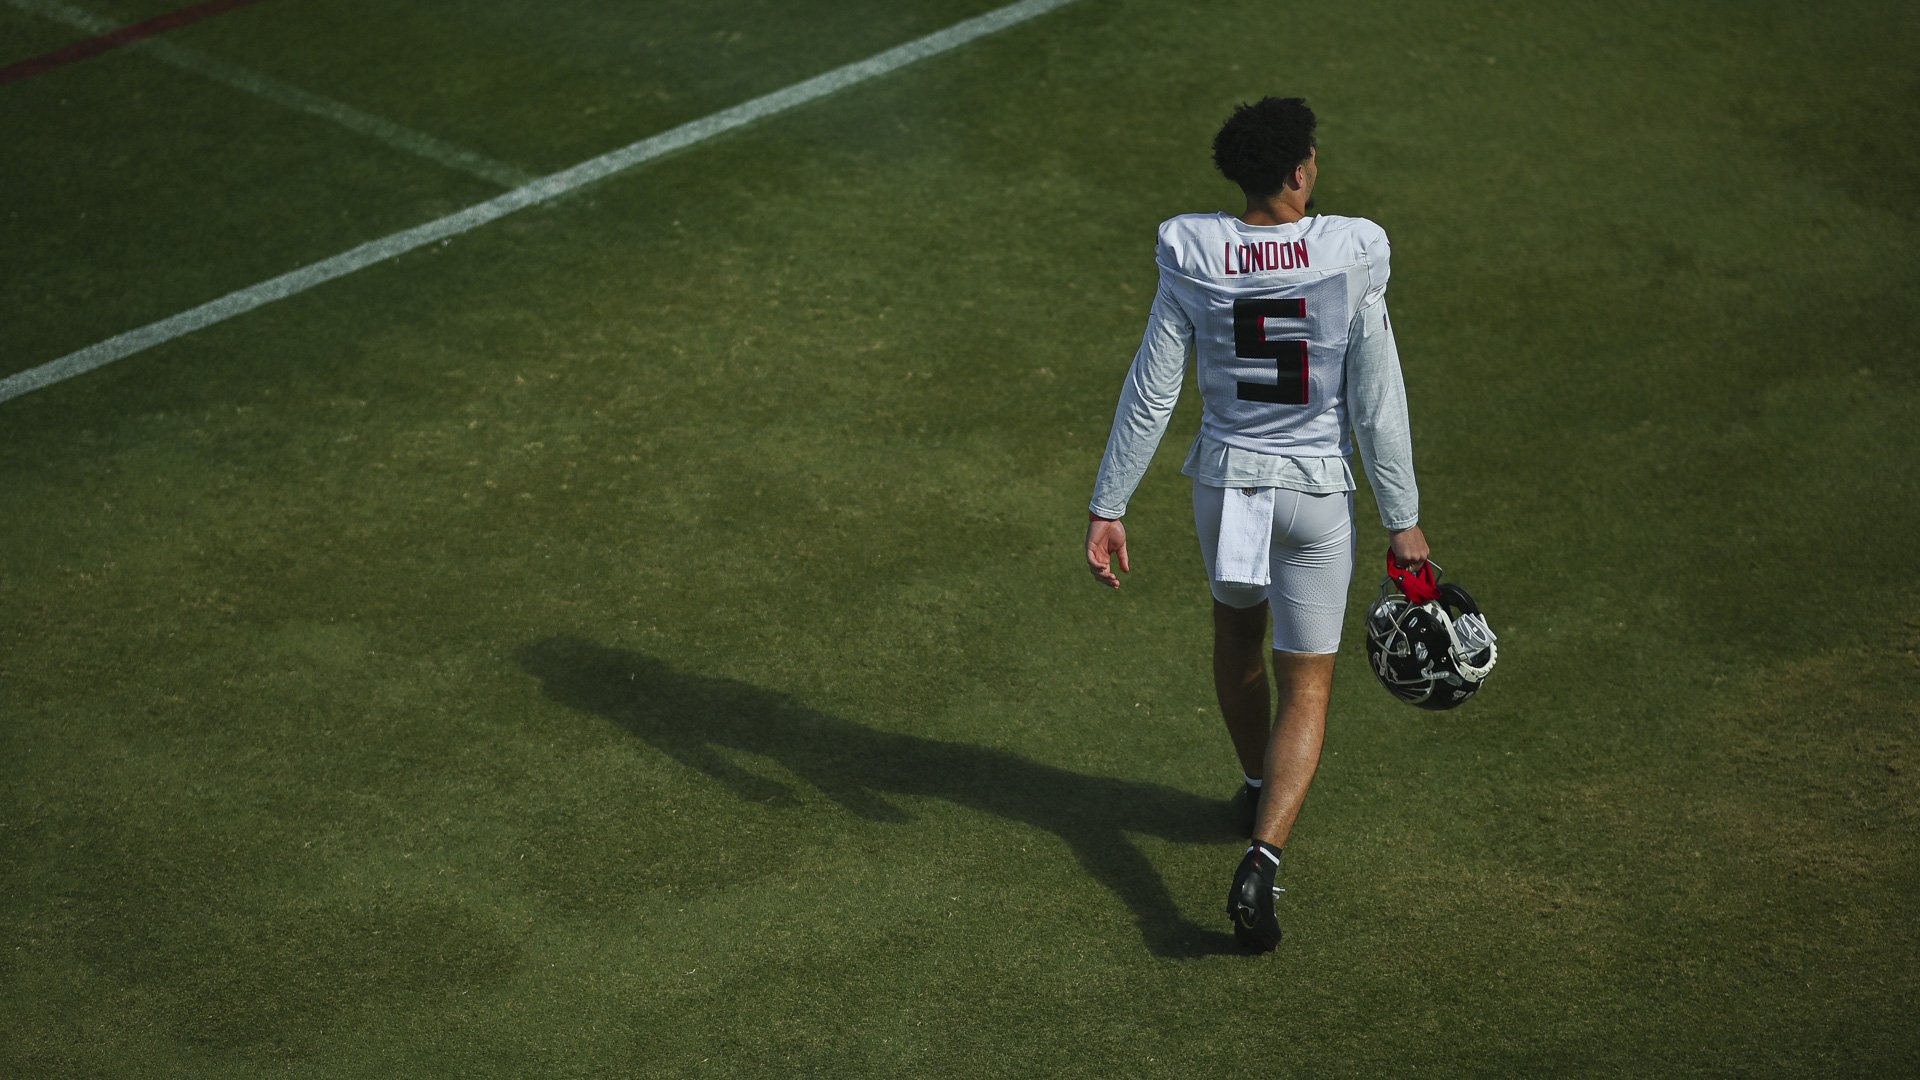  Atlanta Falcons wide receiver Drake London #5 during practice in Flowery Branch, Georgia, on Thursday, October 27, 2022. (Photo by Shanna Lockwood/Atlanta Falcons) 